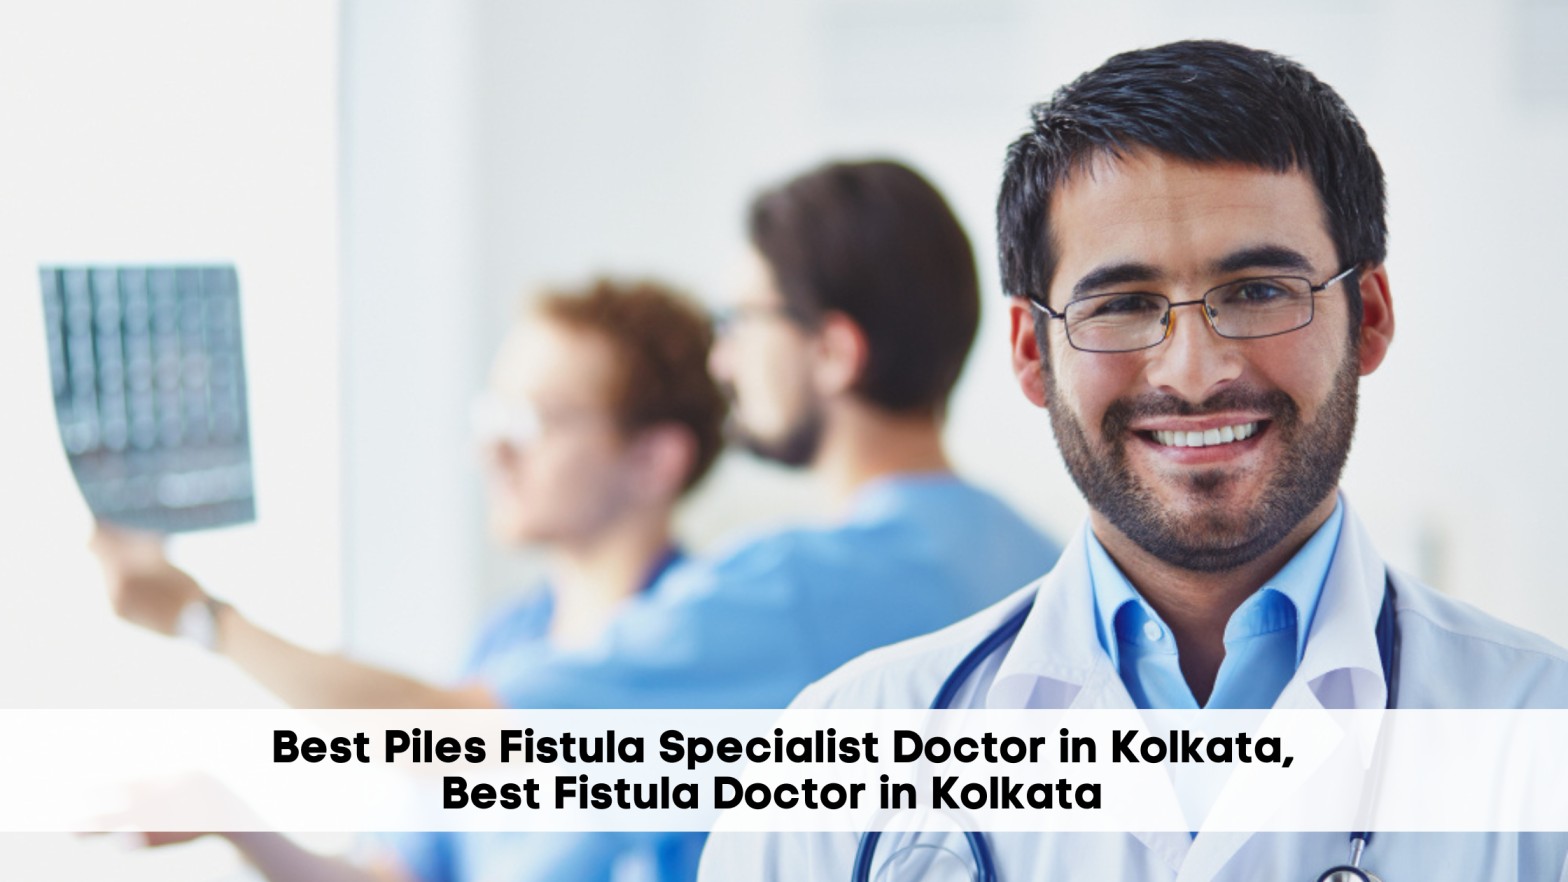 You are currently viewing Best Piles Fistula Specialist Doctor in Kolkata, Best Fistula Doctor in Kolkata  